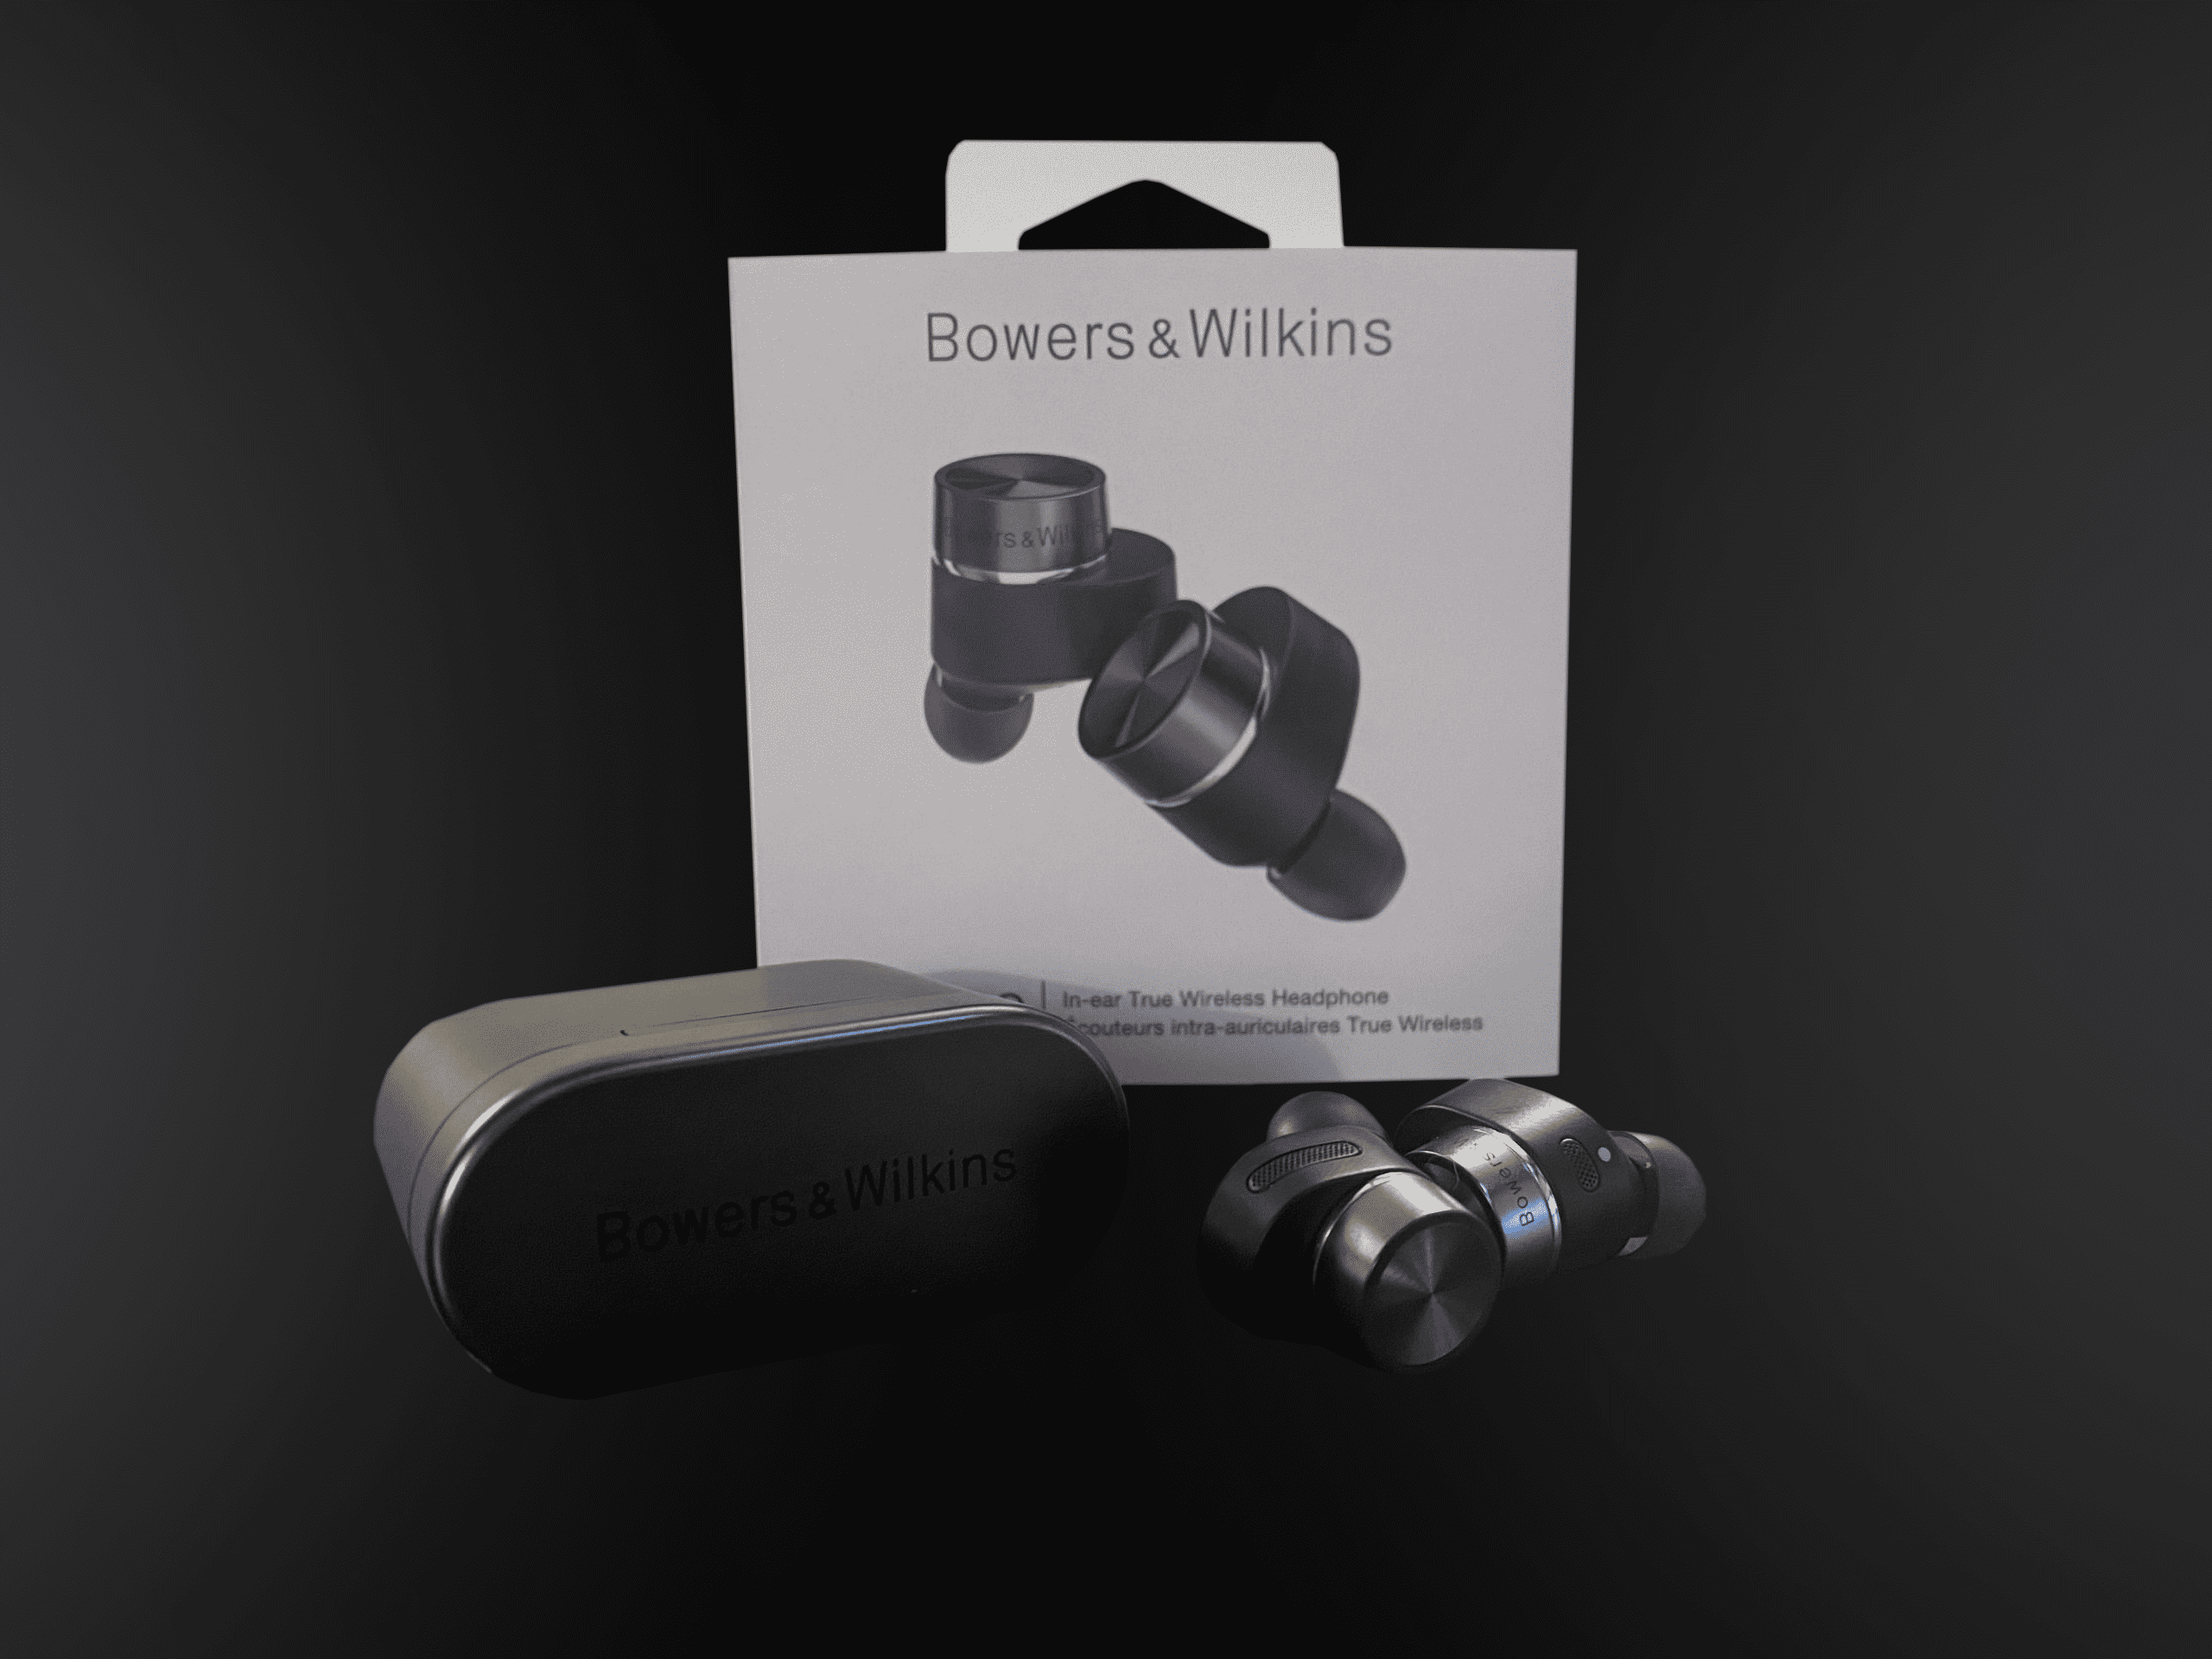 Bowers & Wilkins Pi7 S2 review: Premium earbuds with not-so